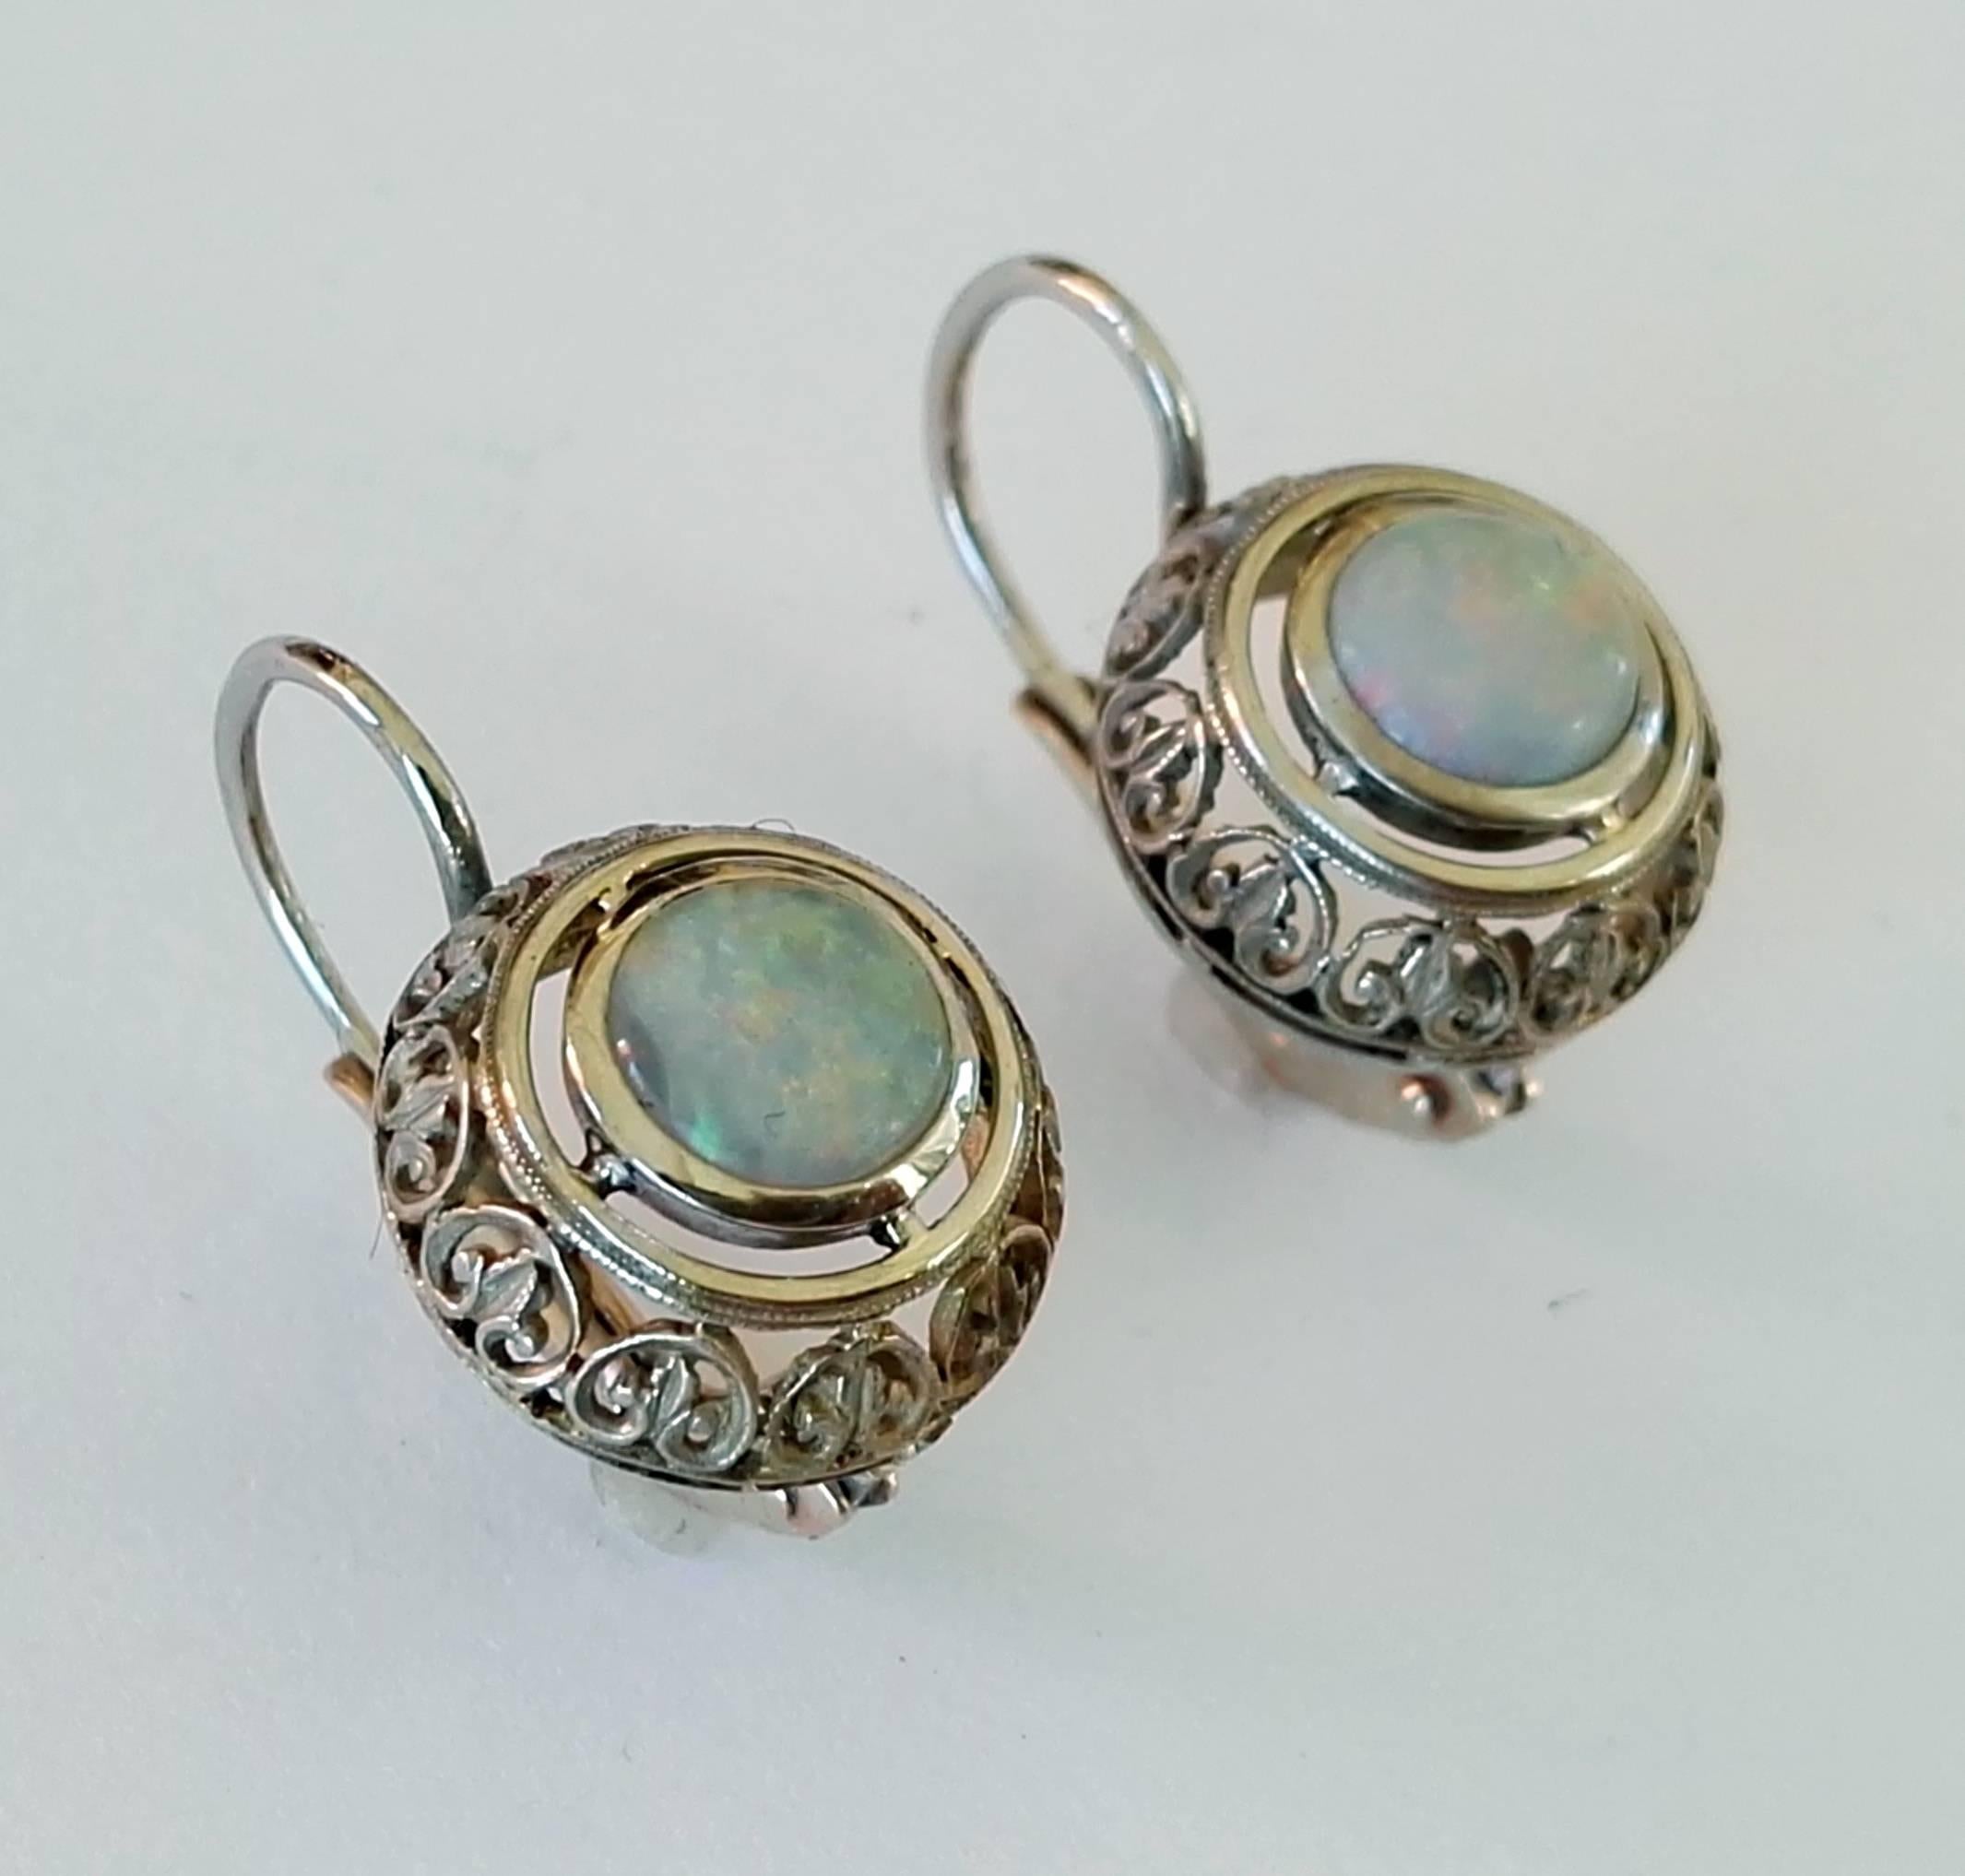 Round cabochon cut australian opal  mounted in vintage white gold earrings. Circa 1920.
The vintage fine handcrafted open-work earrings baskets are mounted with new 18 kt white gold lever backs.. 